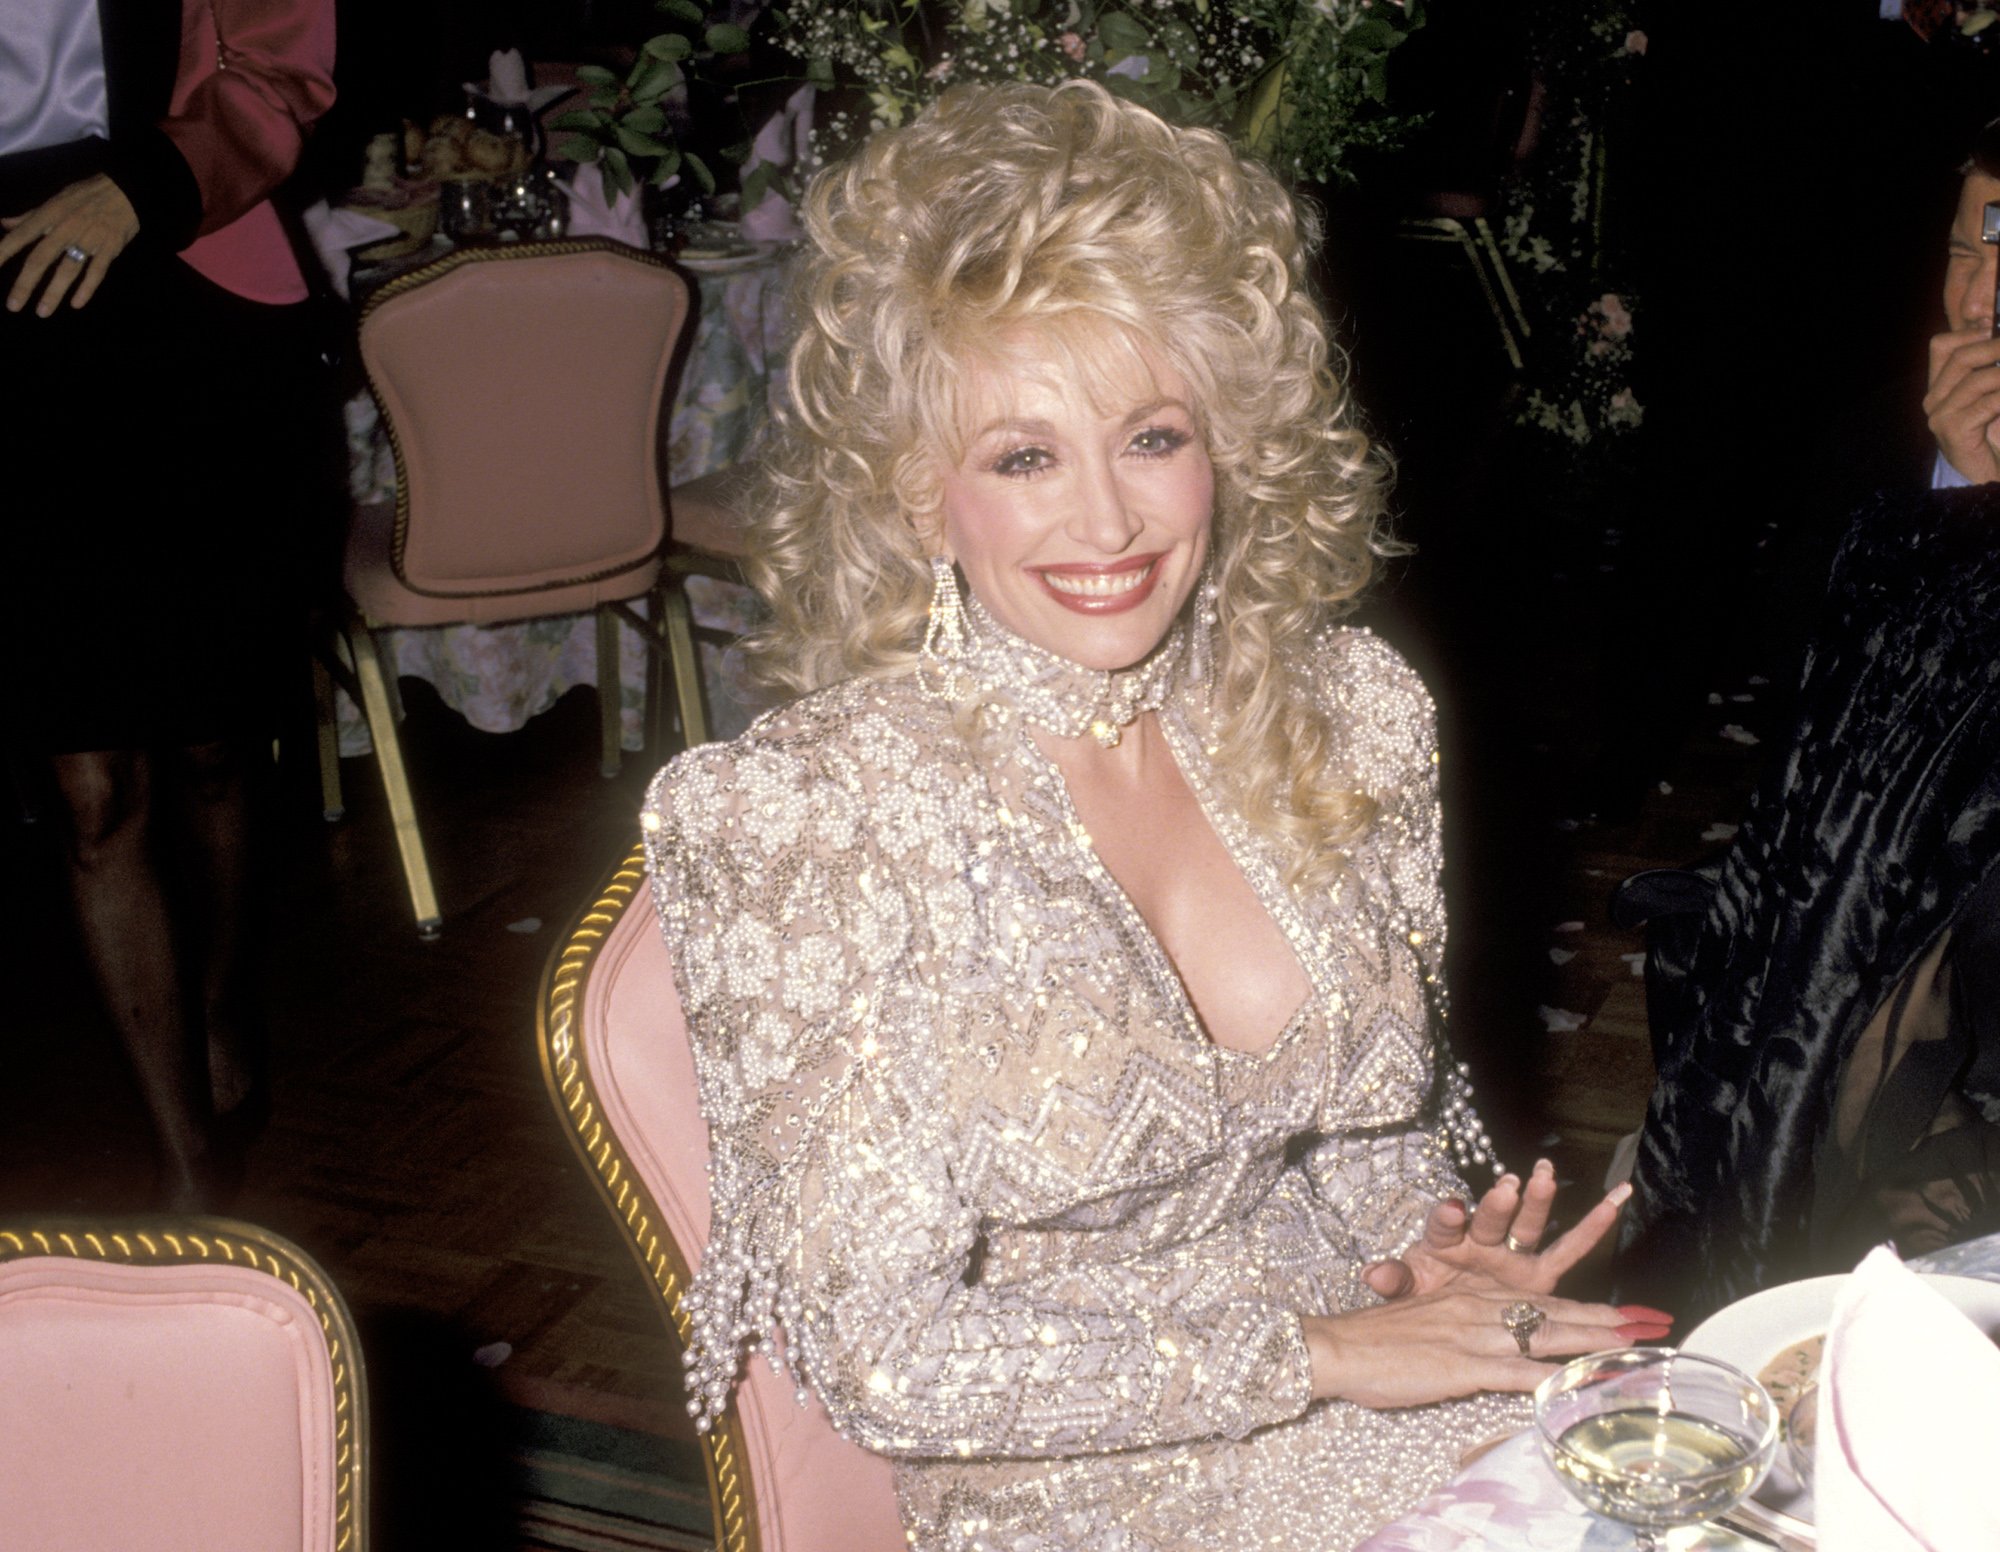 Dolly Parton attending the NYC premiere of 'Steel Magnolias' in 1989